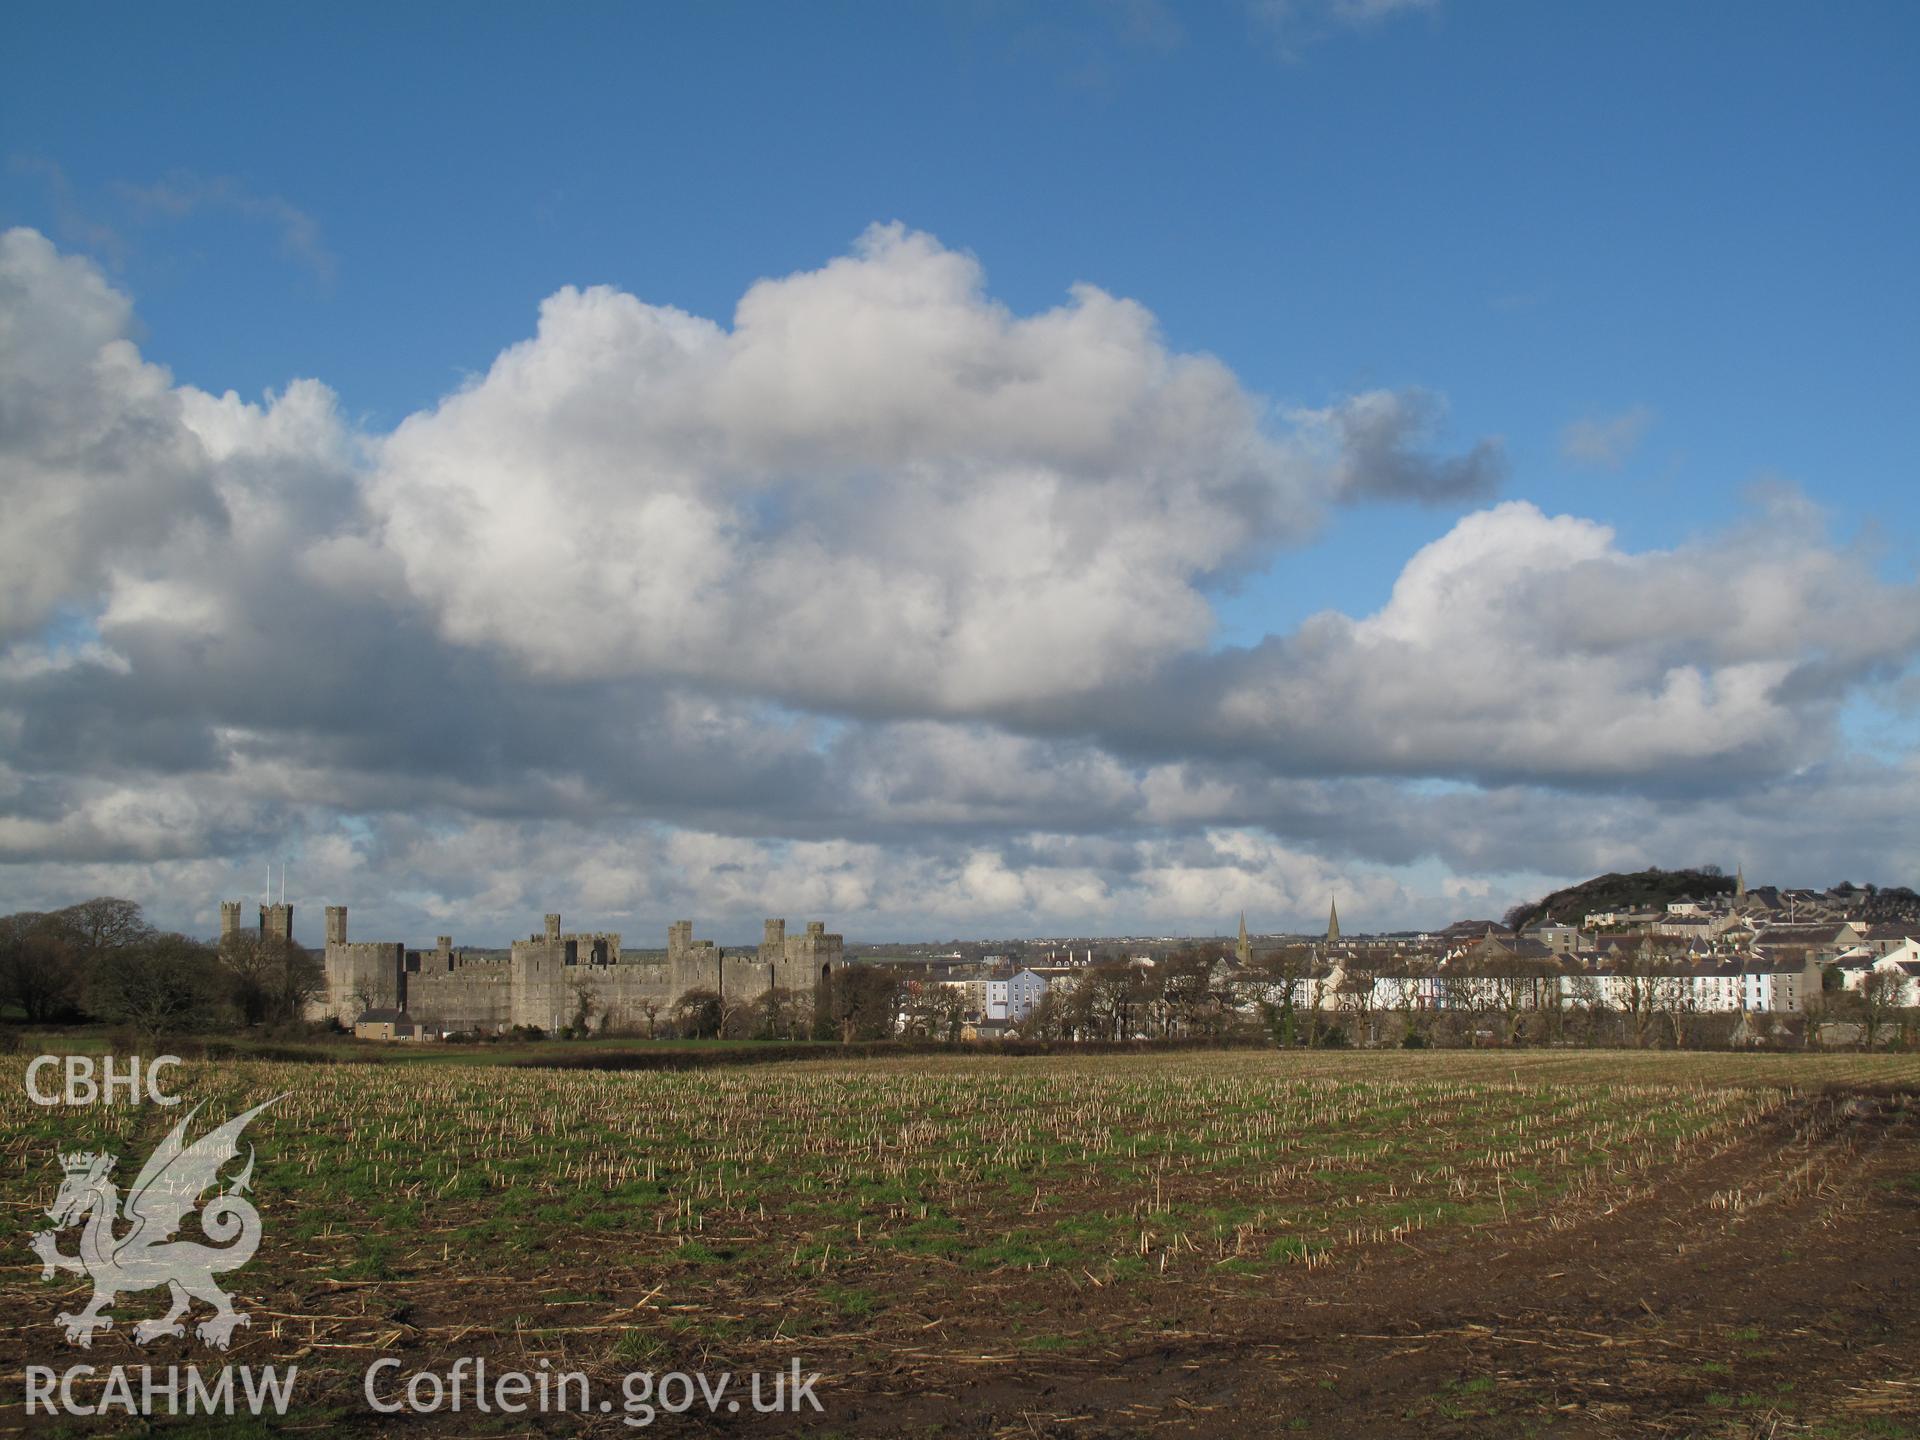 View of Caernarfon Castle and Twthill from the south, taken by Brian Malaws on 21 December 2009.